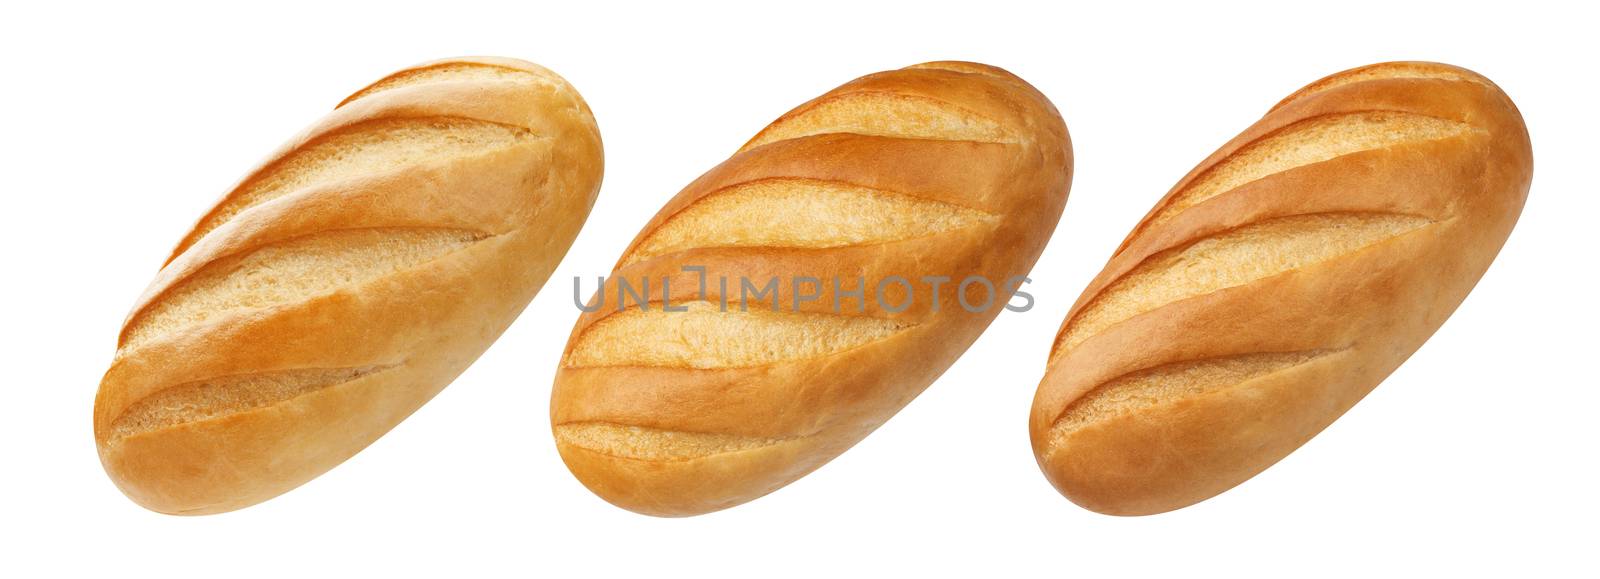 Whole white bread isolated on white background, collection by xamtiw